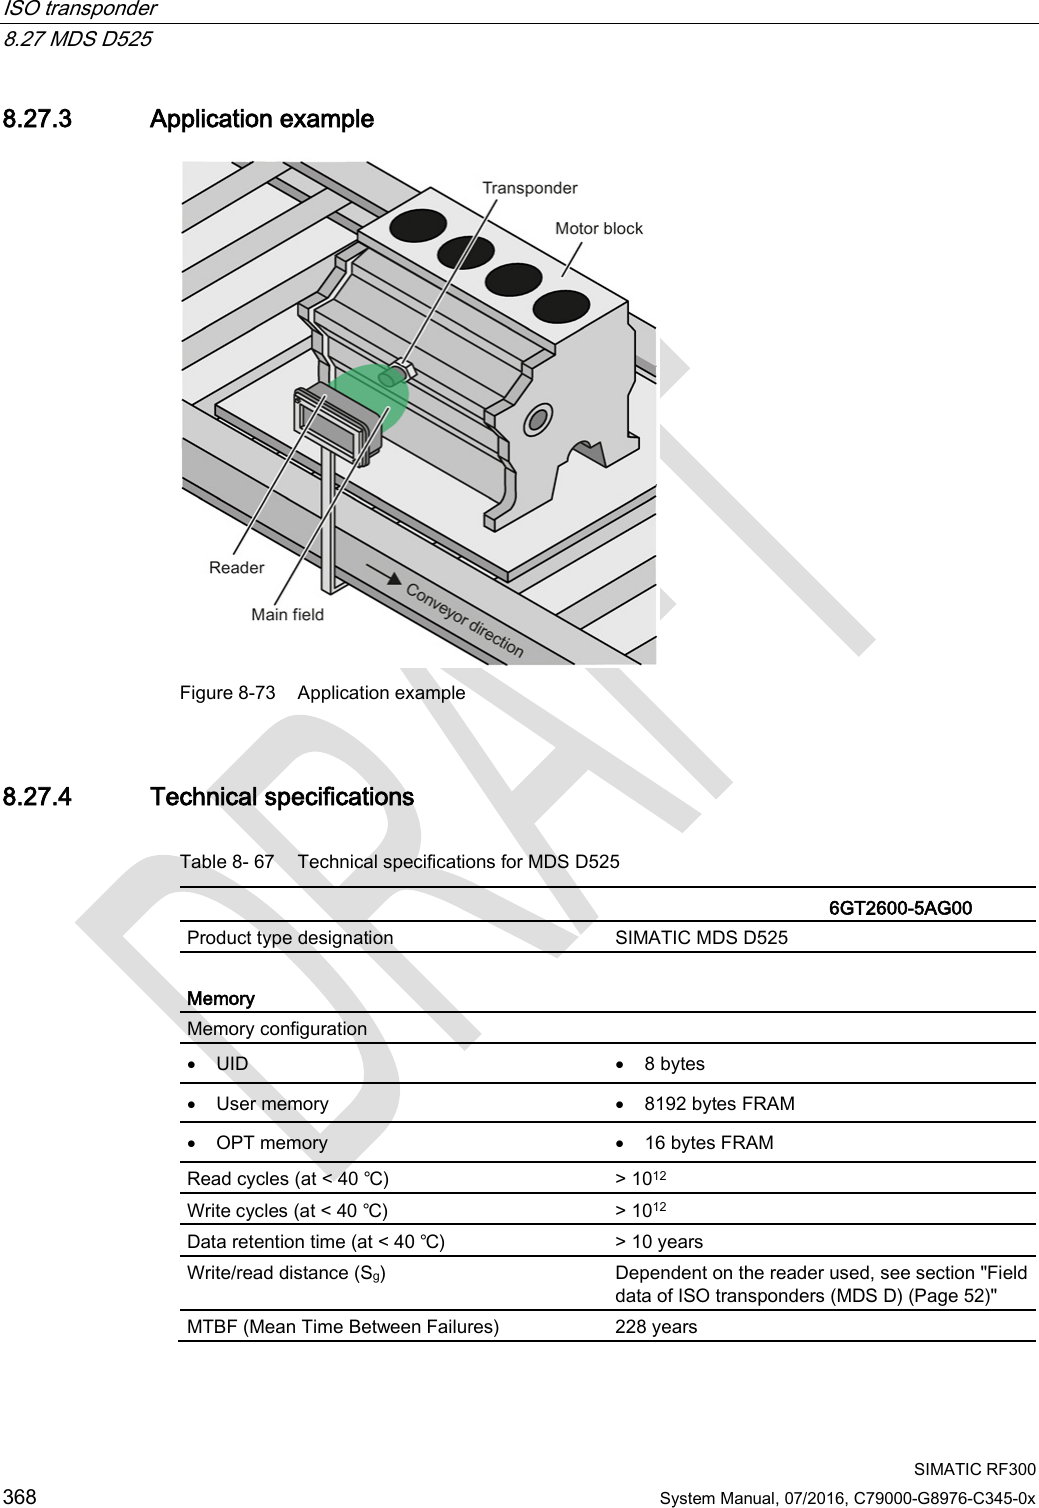 ISO transponder   8.27 MDS D525  SIMATIC RF300 368 System Manual, 07/2016, C79000-G8976-C345-0x 8.27.3 Application example  Figure 8-73 Application example 8.27.4 Technical specifications Table 8- 67 Technical specifications for MDS D525    6GT2600-5AG00  Product type designation SIMATIC MDS D525  Memory Memory configuration   • UID • 8 bytes • User memory • 8192 bytes FRAM • OPT memory • 16 bytes FRAM Read cycles (at &lt; 40 ℃) &gt; 1012 Write cycles (at &lt; 40 ℃) &gt; 1012 Data retention time (at &lt; 40 ℃) &gt; 10 years Write/read distance (Sg)  Dependent on the reader used, see section &quot;Field data of ISO transponders (MDS D) (Page 52)&quot; MTBF (Mean Time Between Failures) 228 years 